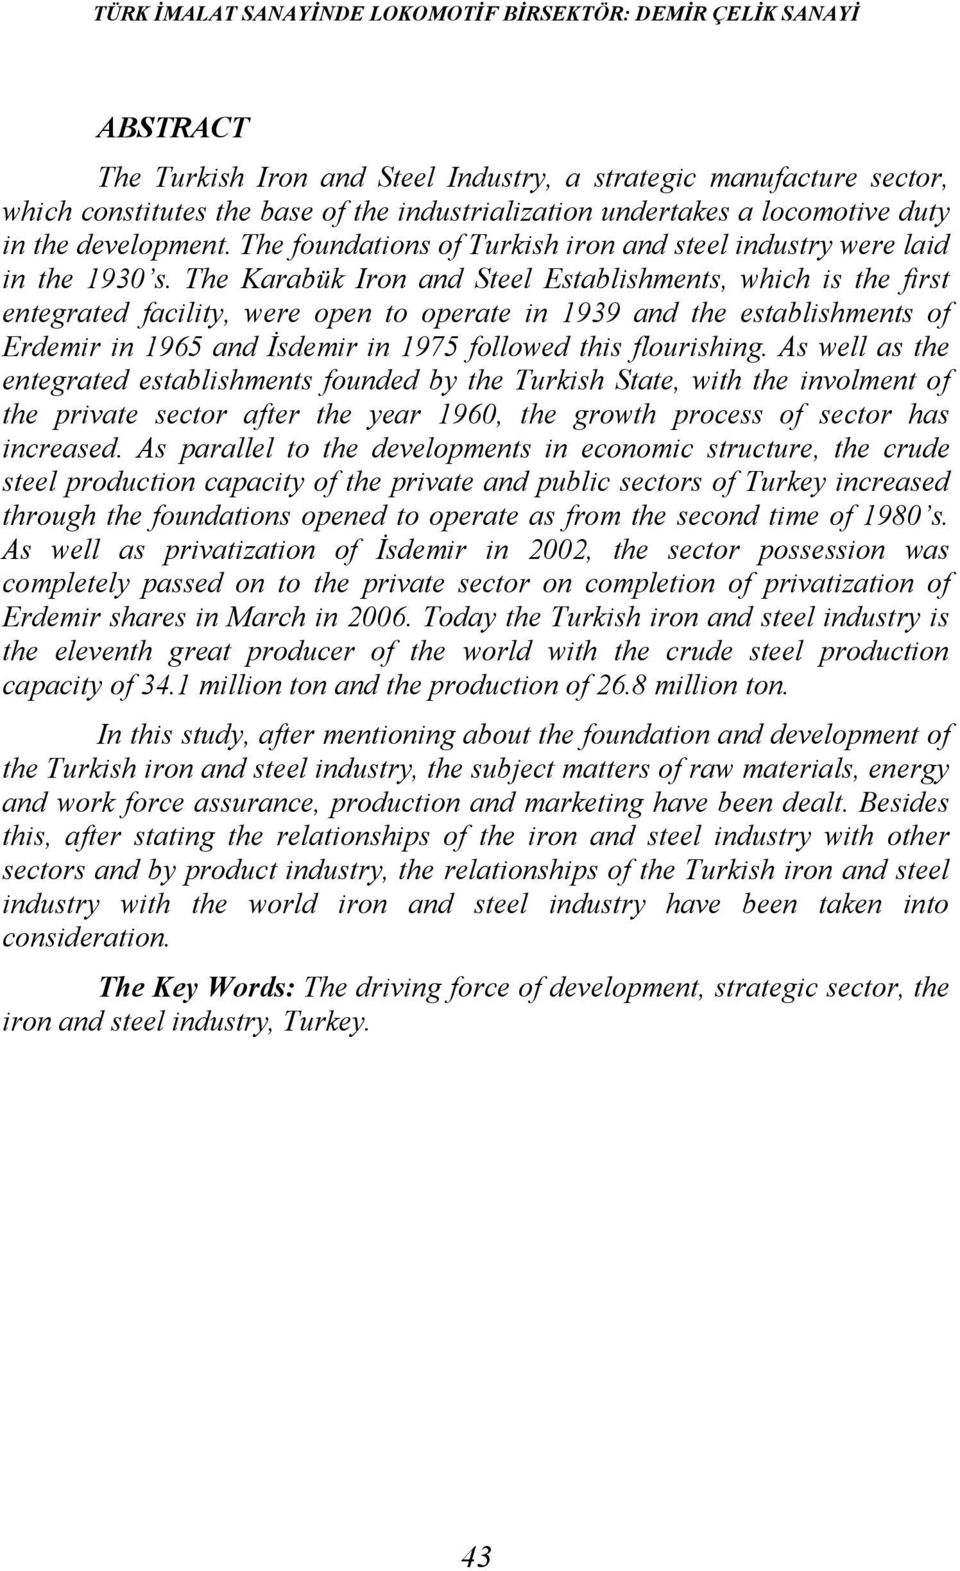 The Karabük Iron and Steel Establishments, which is the first entegrated facility, were open to operate in 1939 and the establishments of Erdemir in 1965 and İsdemir in 1975 followed this flourishing.